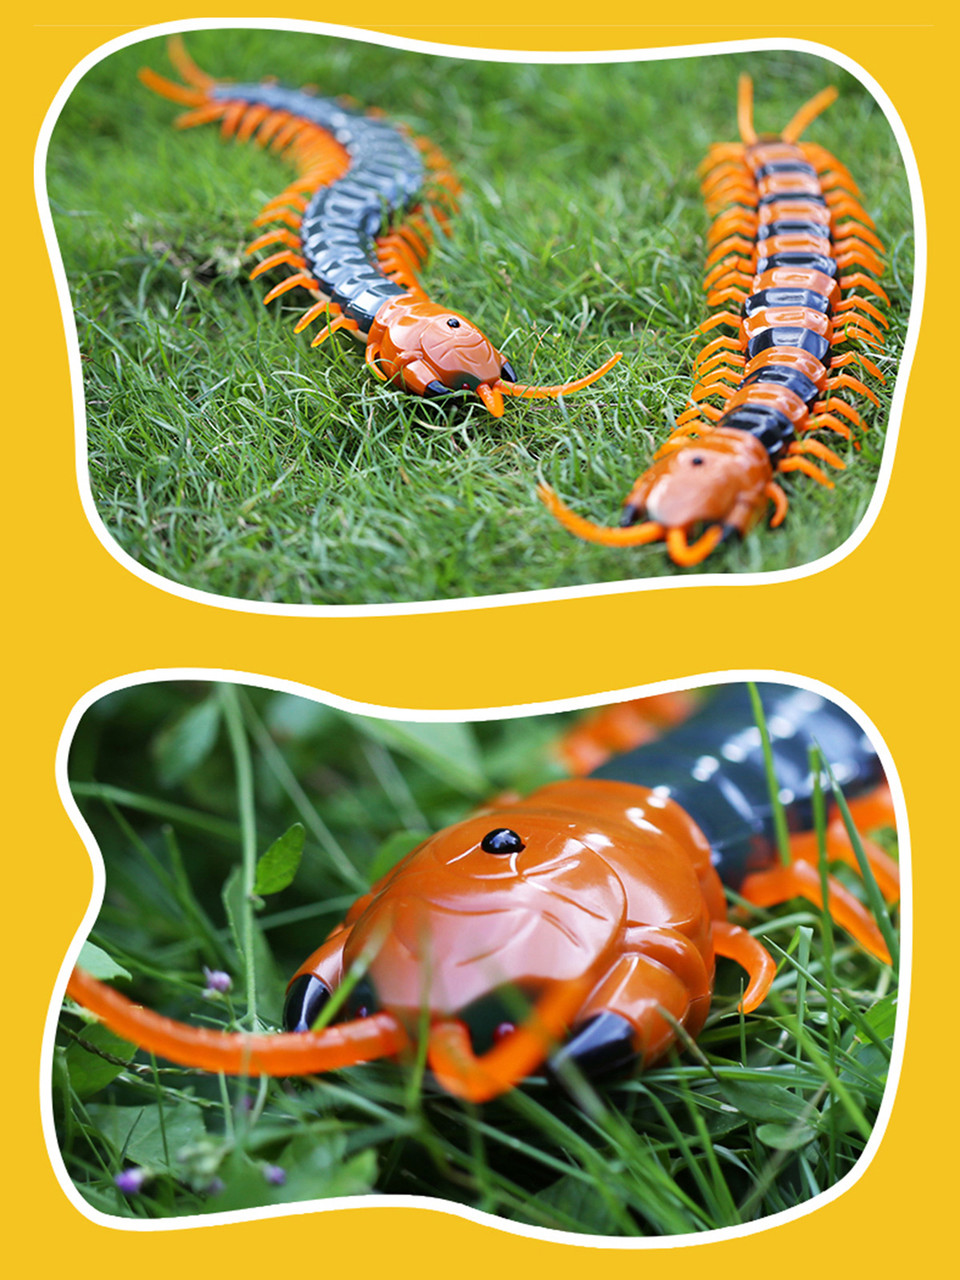 Remote Control Centipede Infrared Animal Electric Toy Kid Christmas Gift Black